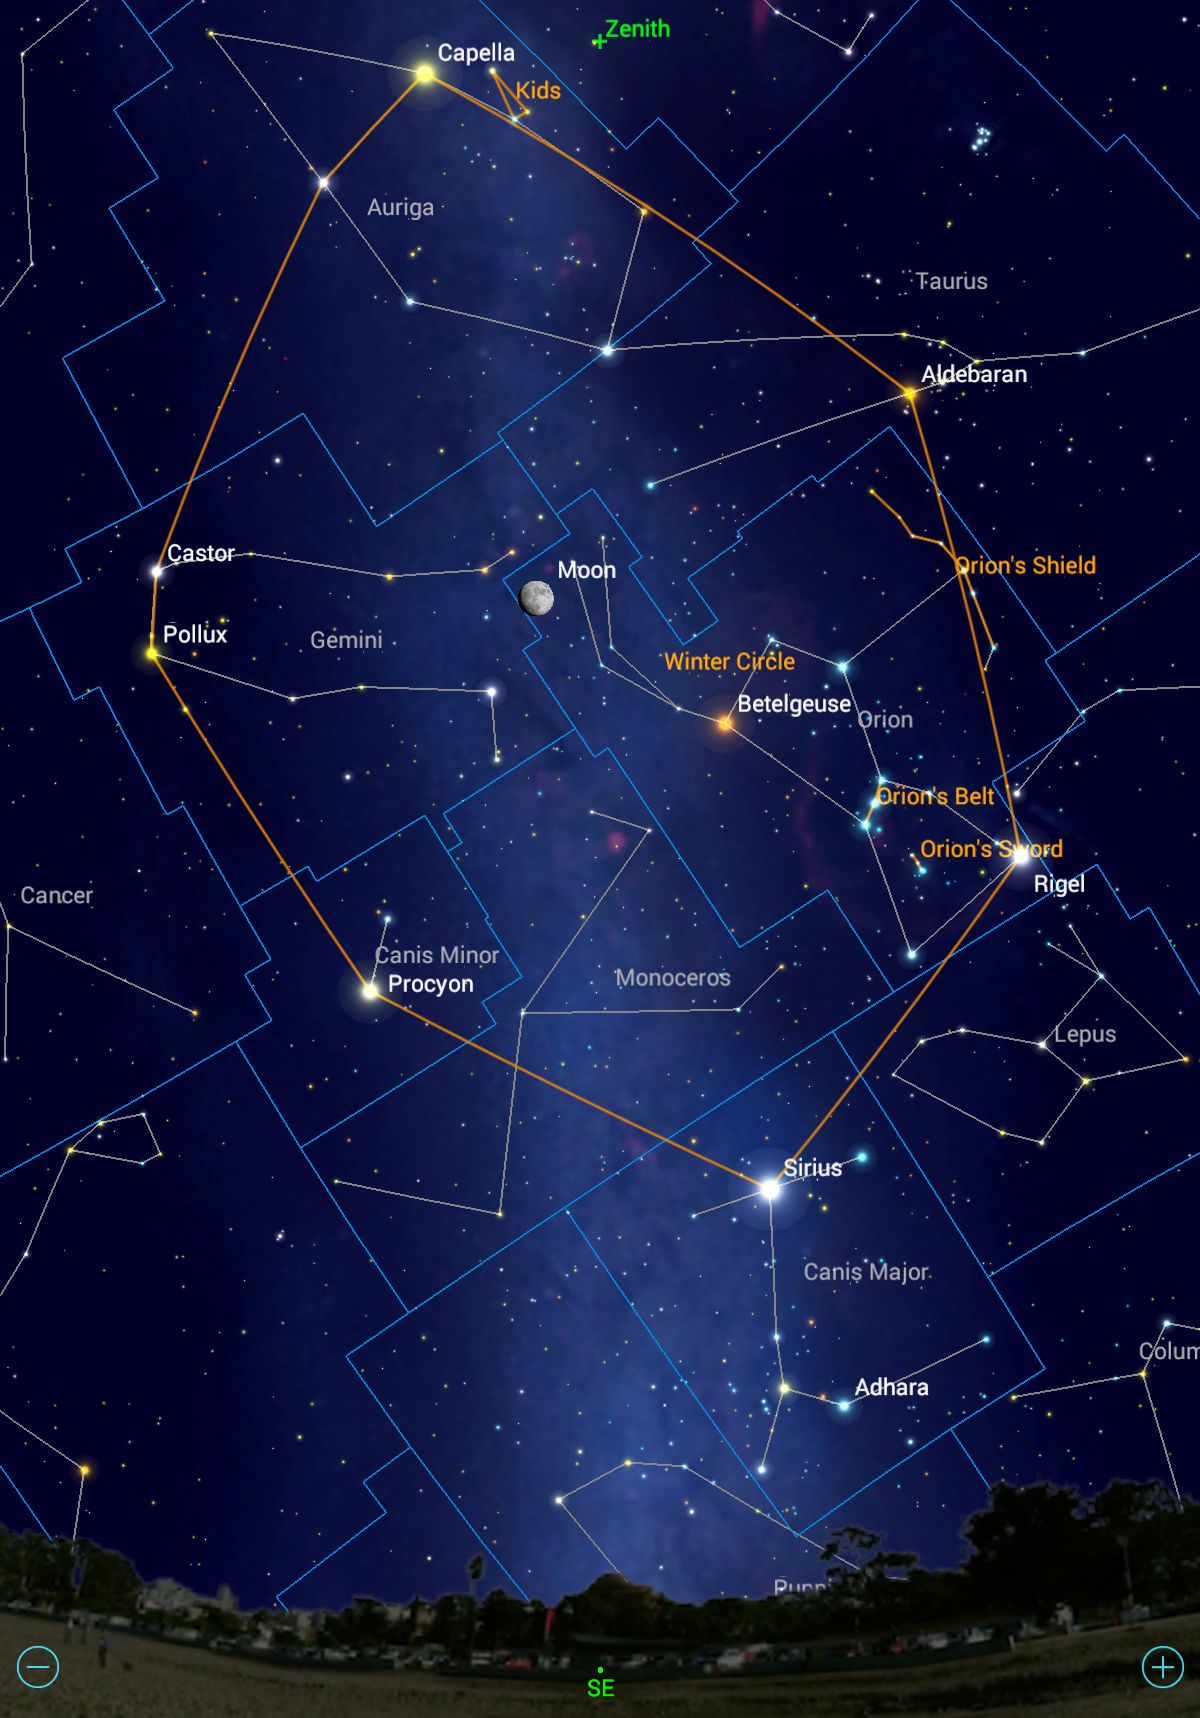 Catch the 'Winter Football' and Other Asterisms with Mobile Astronomy ...